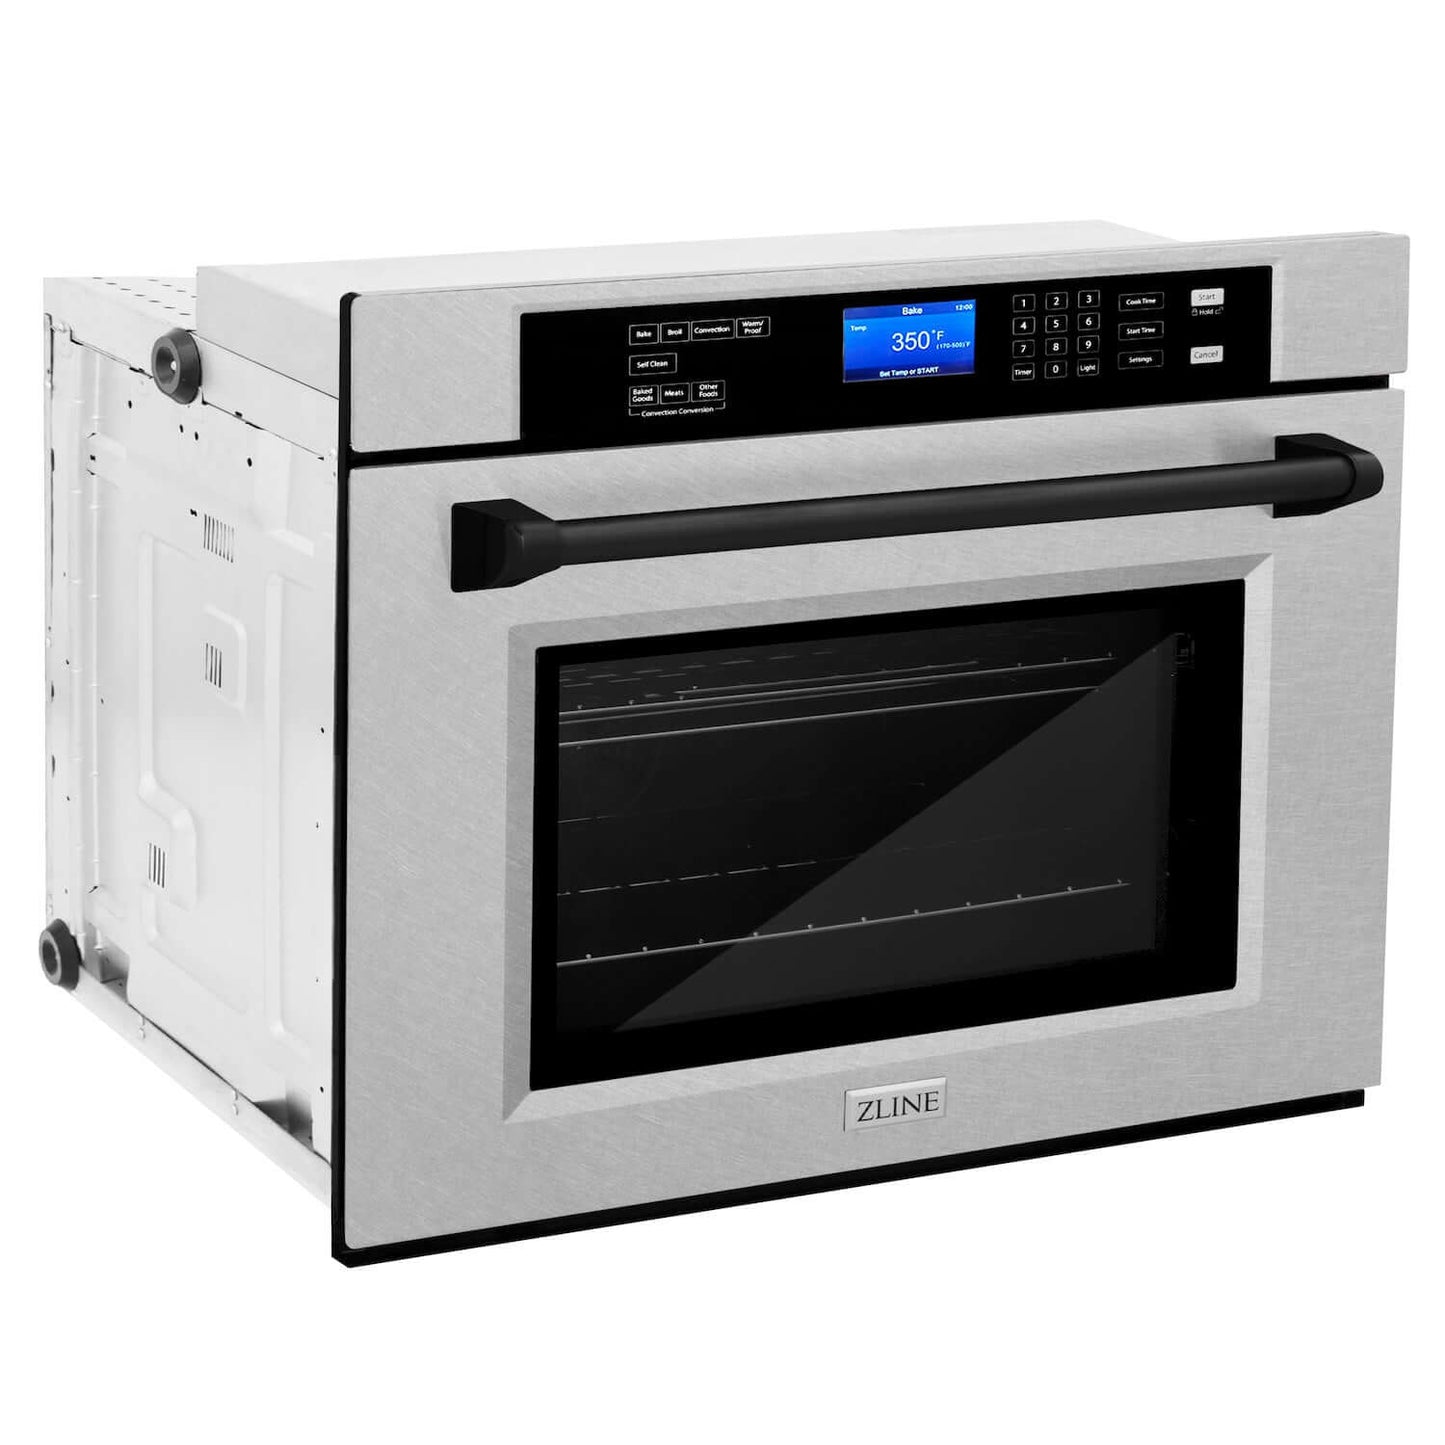 ZLINE 30 in. Autograph Edition Electric Single Wall Oven with Self Clean and True Convection in Fingerprint Resistant Stainless Steel and Matte Black Accents (AWSSZ-30-MB)